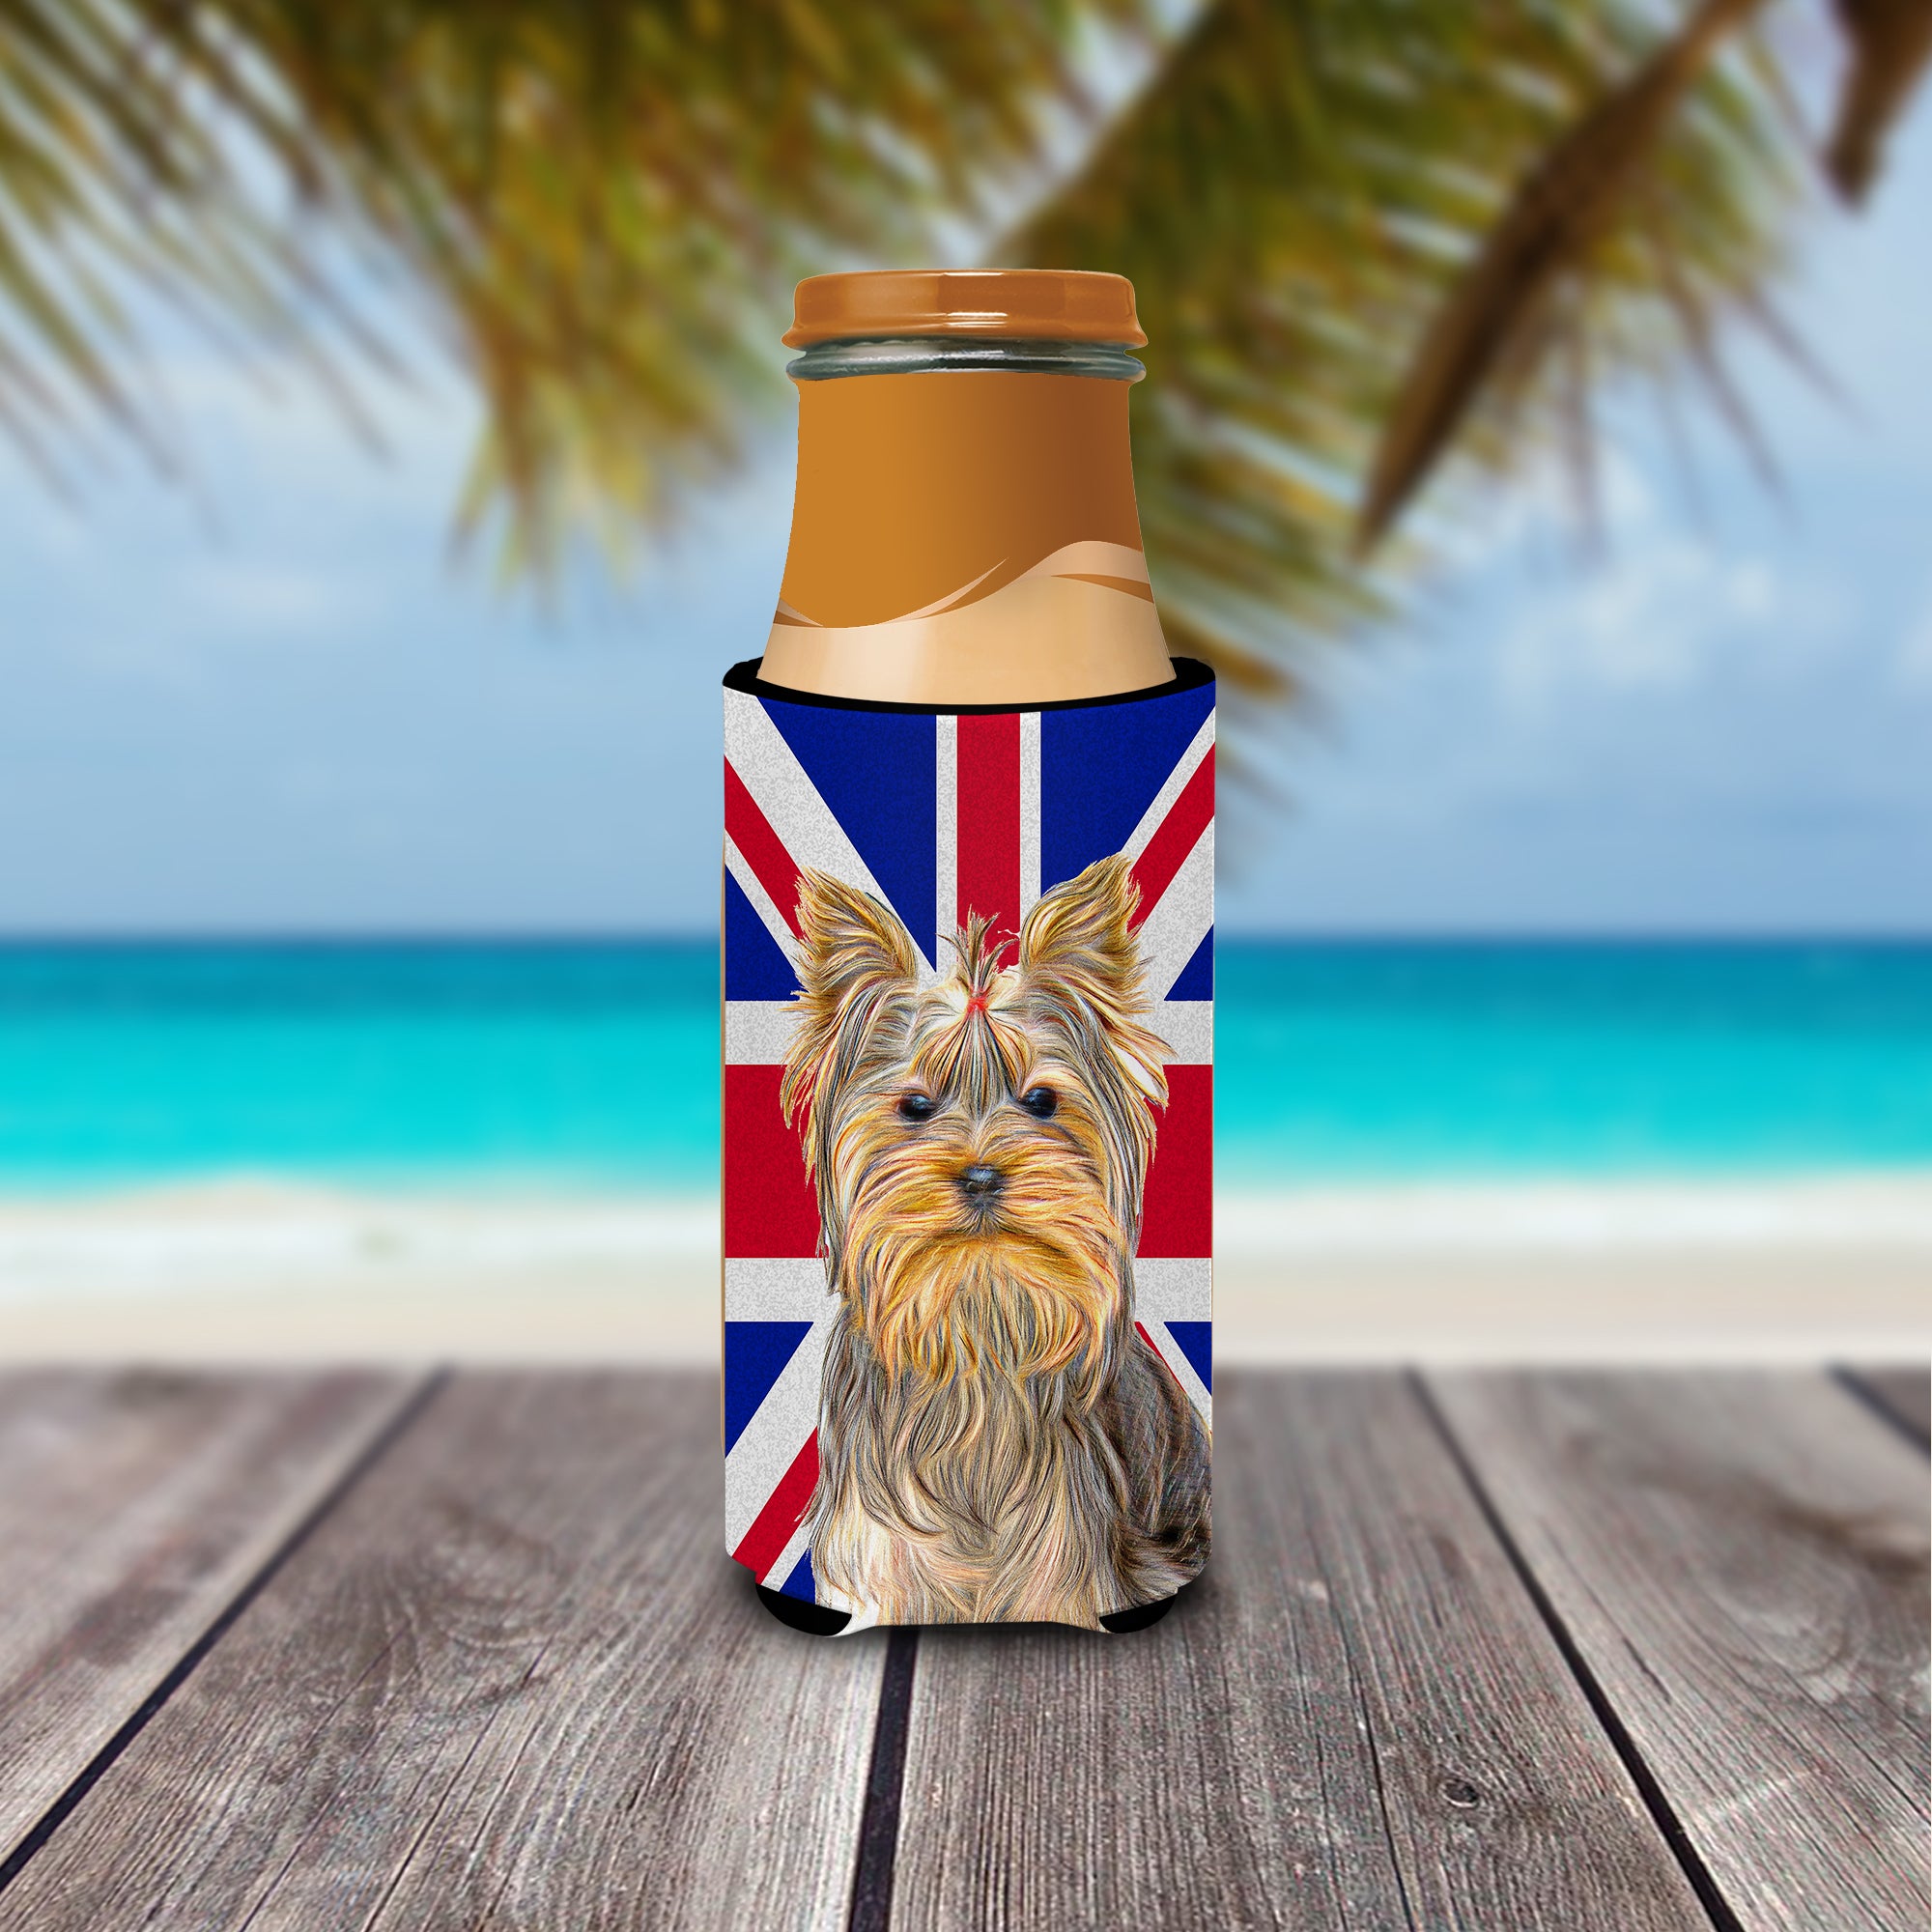 Yorkie / Yorkshire Terrier with English Union Jack British Flag Ultra Beverage Insulators for slim cans KJ1163MUK